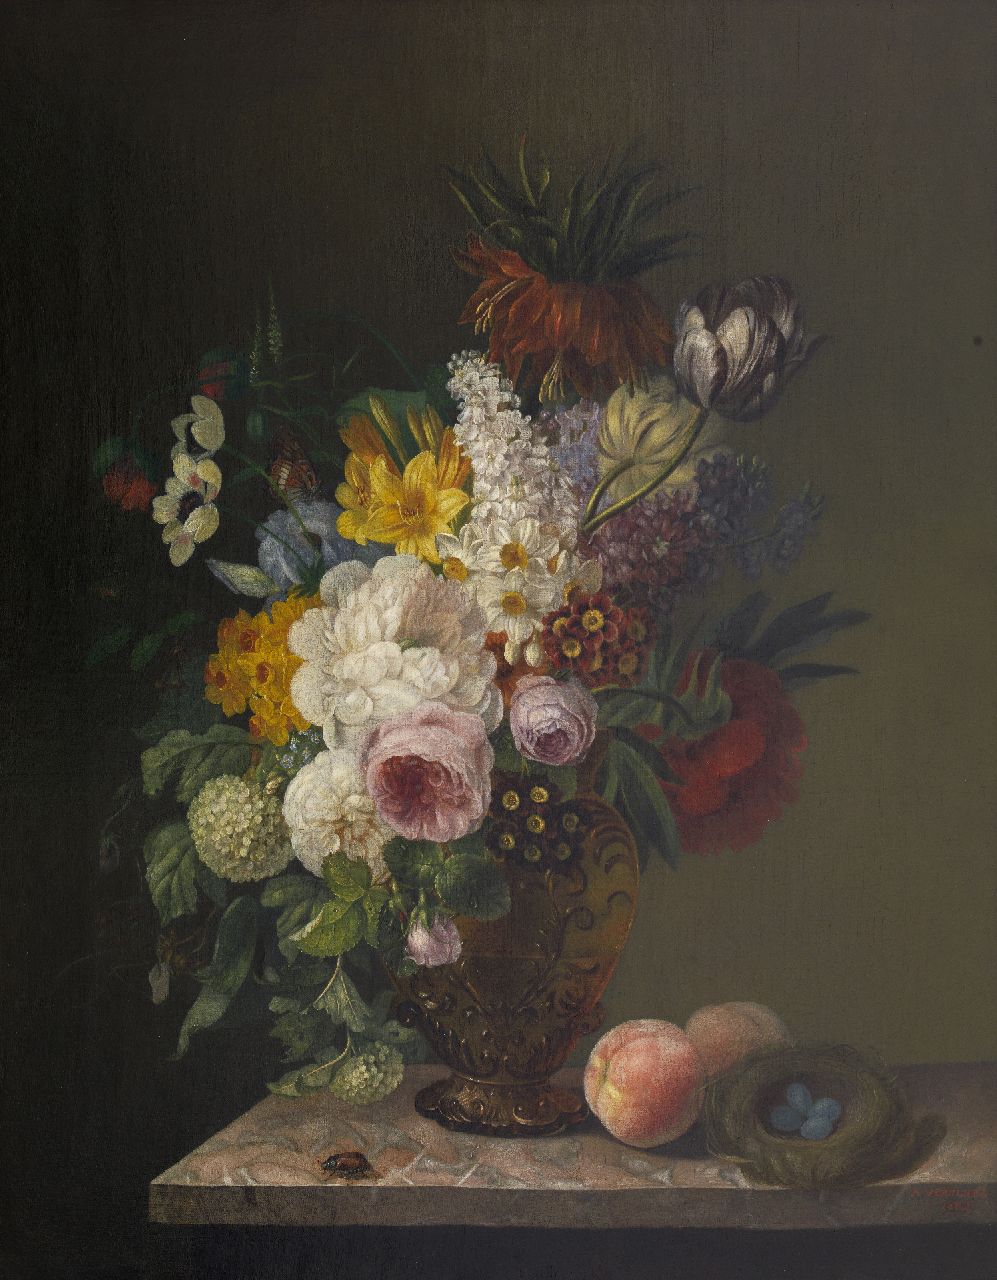 Vervloet A.  | Augustine Vervloet, Flowers in a vase with insect and a bird's nest, oil on canvas 80.4 x 64.4 cm, signed l.r. and dated 1888